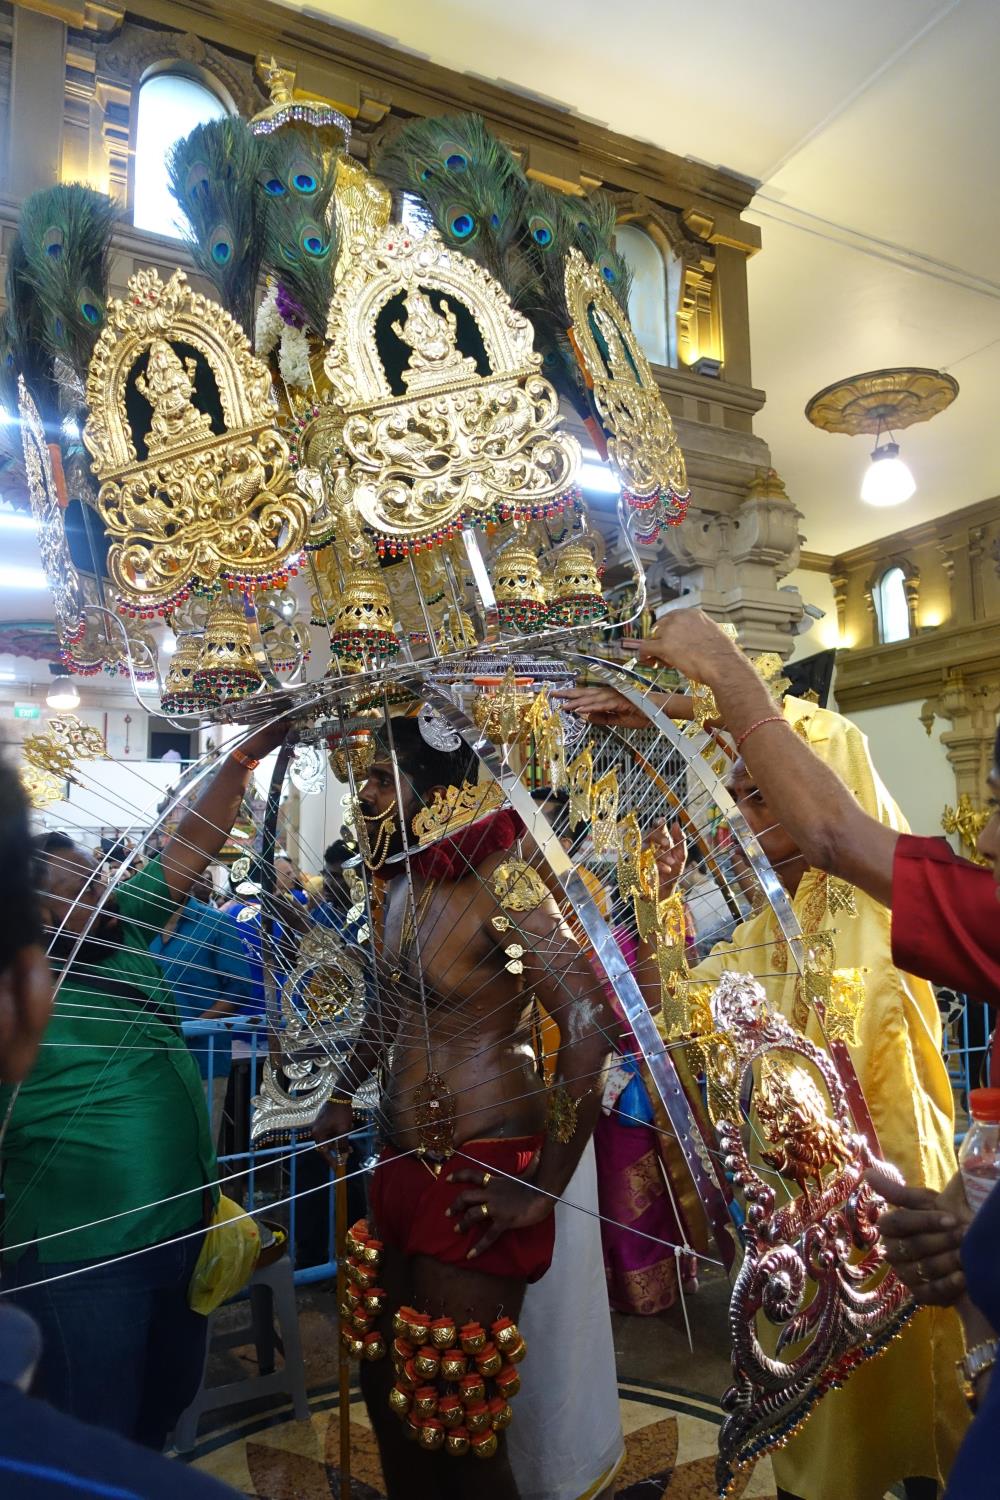 Mr Murali Raj with his fully assembled kavadi. This elaborate structure is held up by the long spikes pierced through his body.